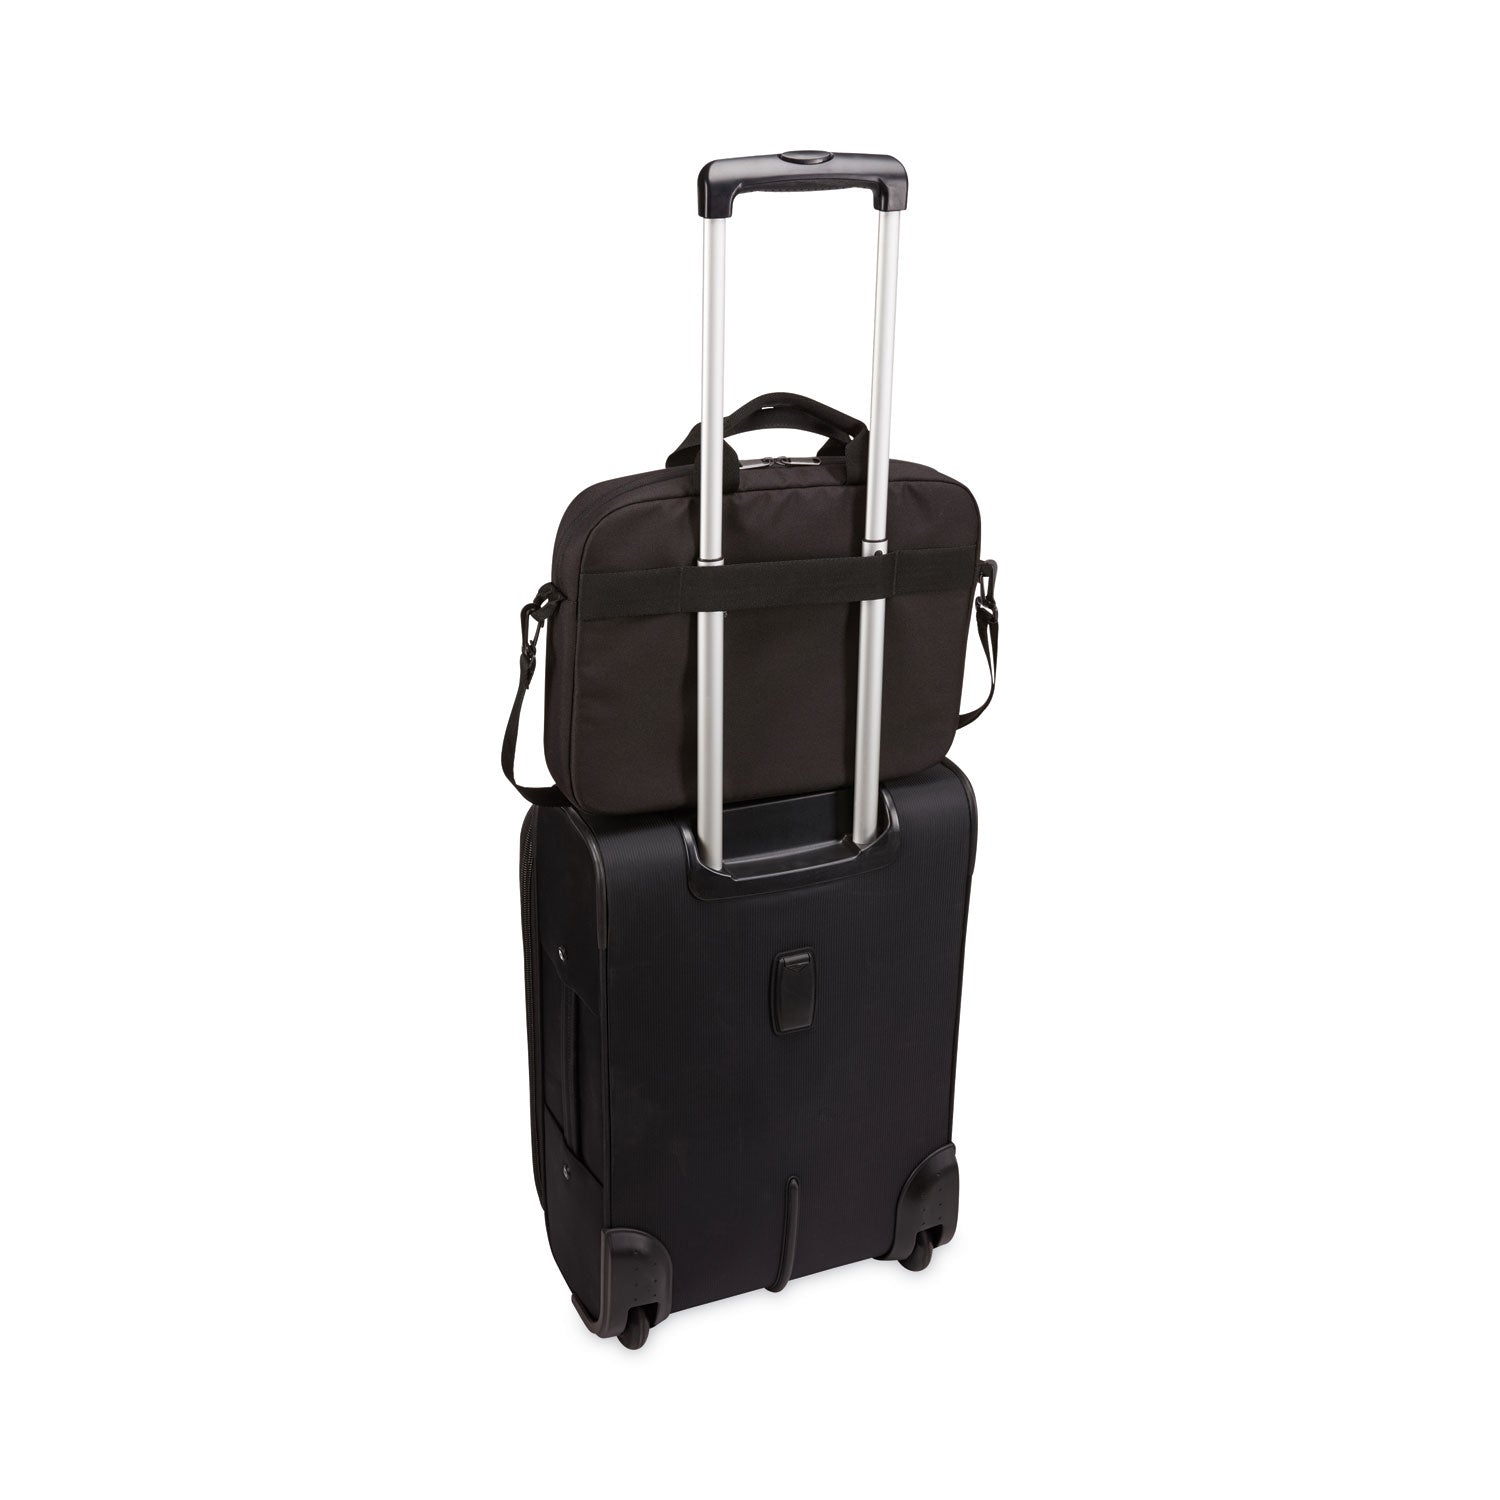 advantage-laptop-attache-fits-devices-up-to-14-polyester-146-x-28-x-13-black_clg3203986 - 6